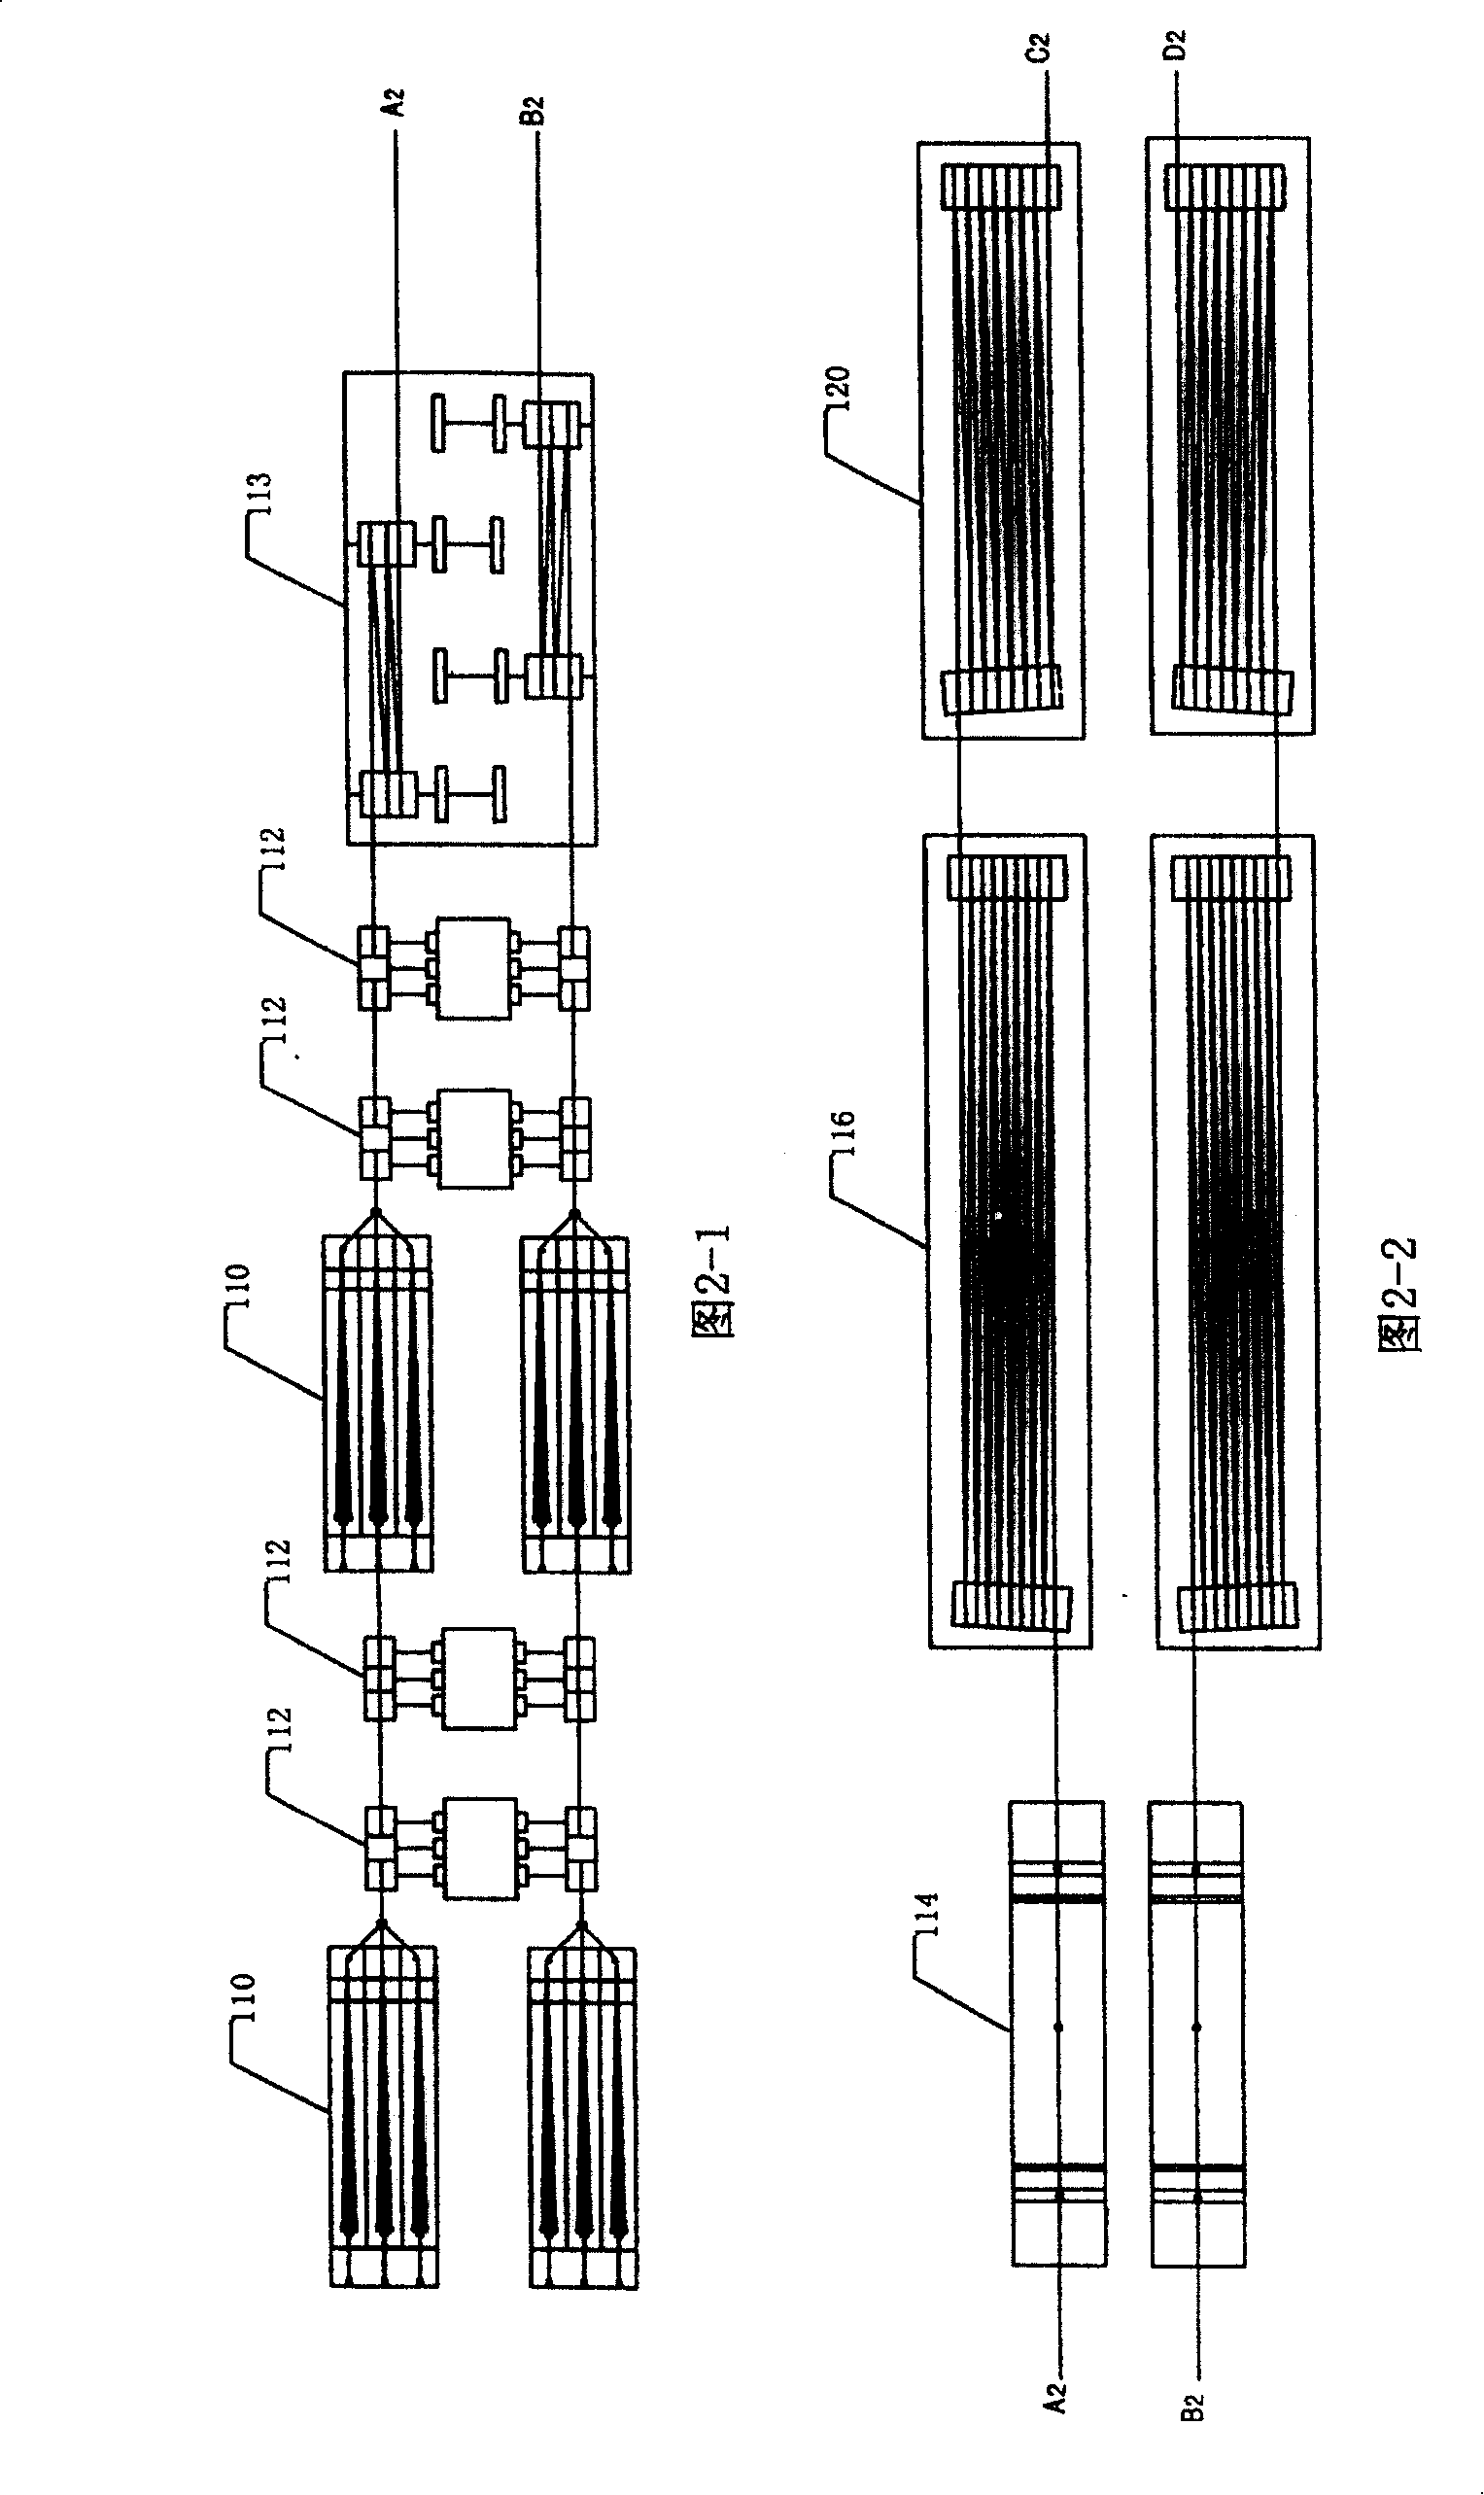 Process and apparatus for manufacturing vinylon filament